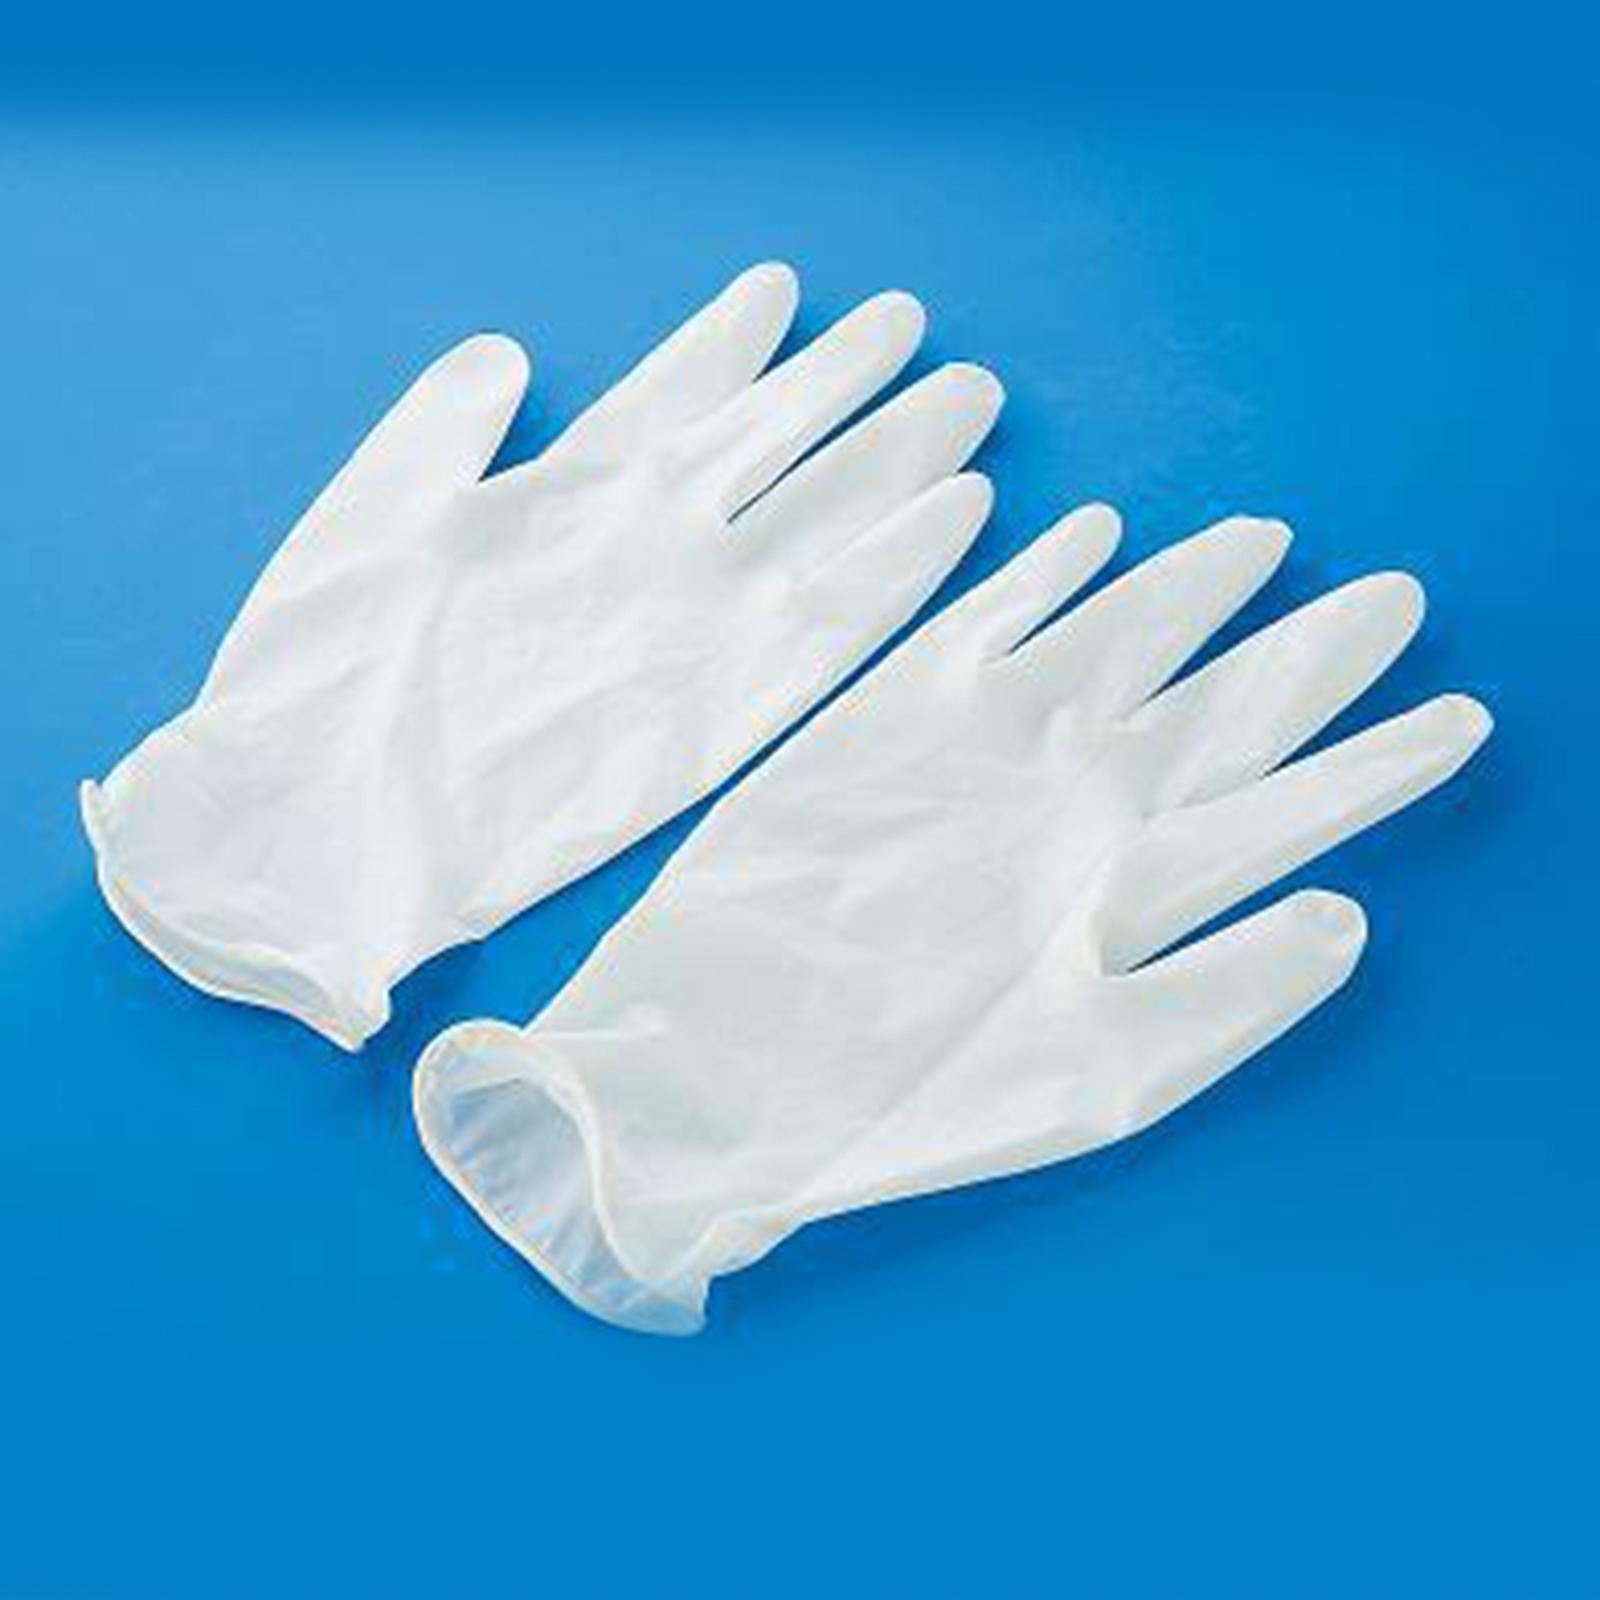 10Pcs Strong Nitrile Gloves Powder Free Pet Care Protective Gloves White S